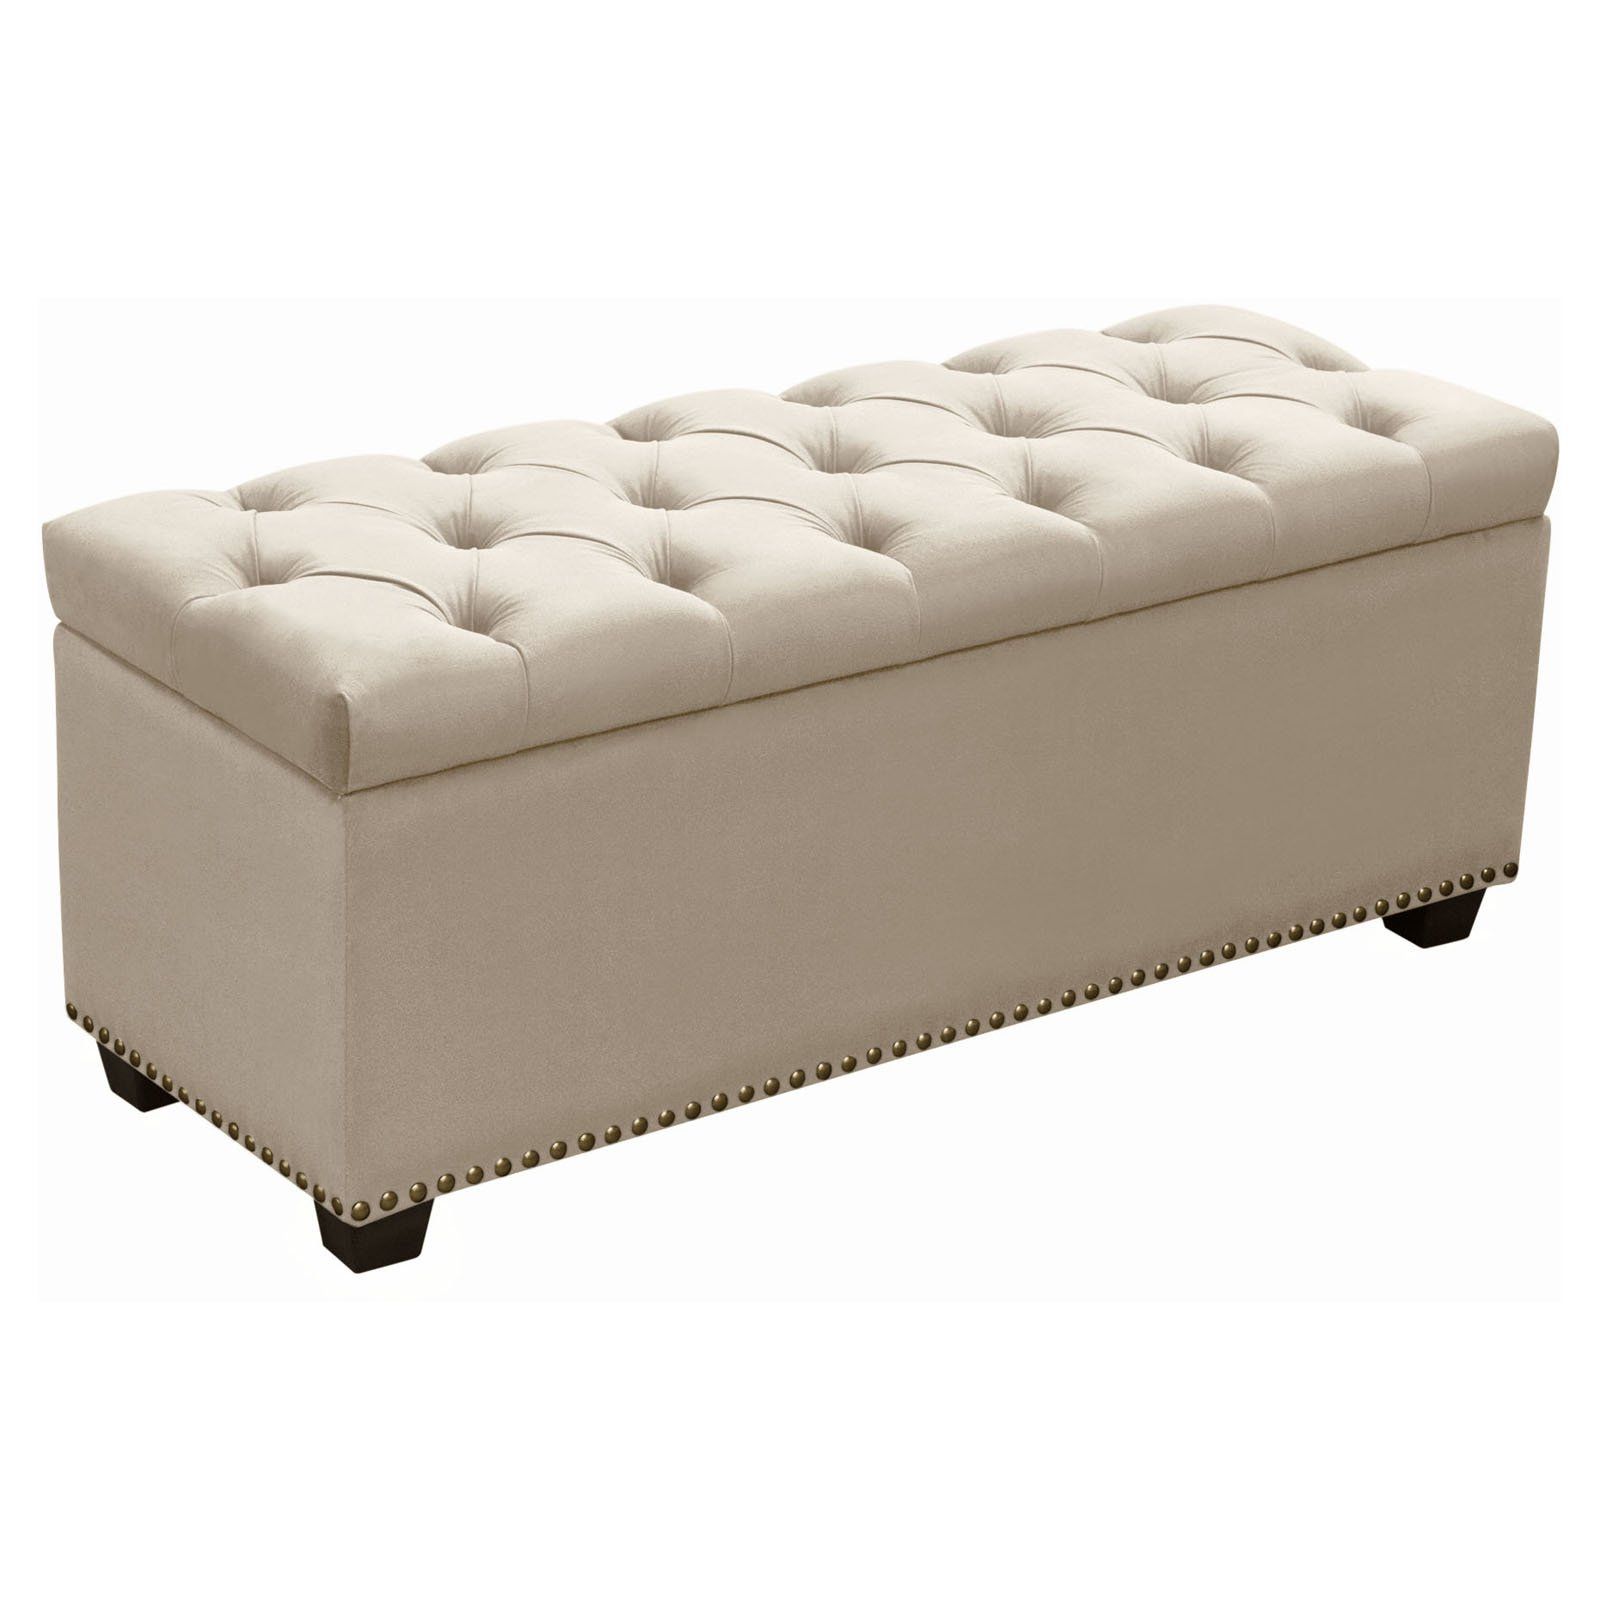 Diamond Sofa Majestic Tufted Velvet Lift Top Storage Trunk With Nail With Linen Tufted Lift Top Storage Trunk (View 4 of 20)